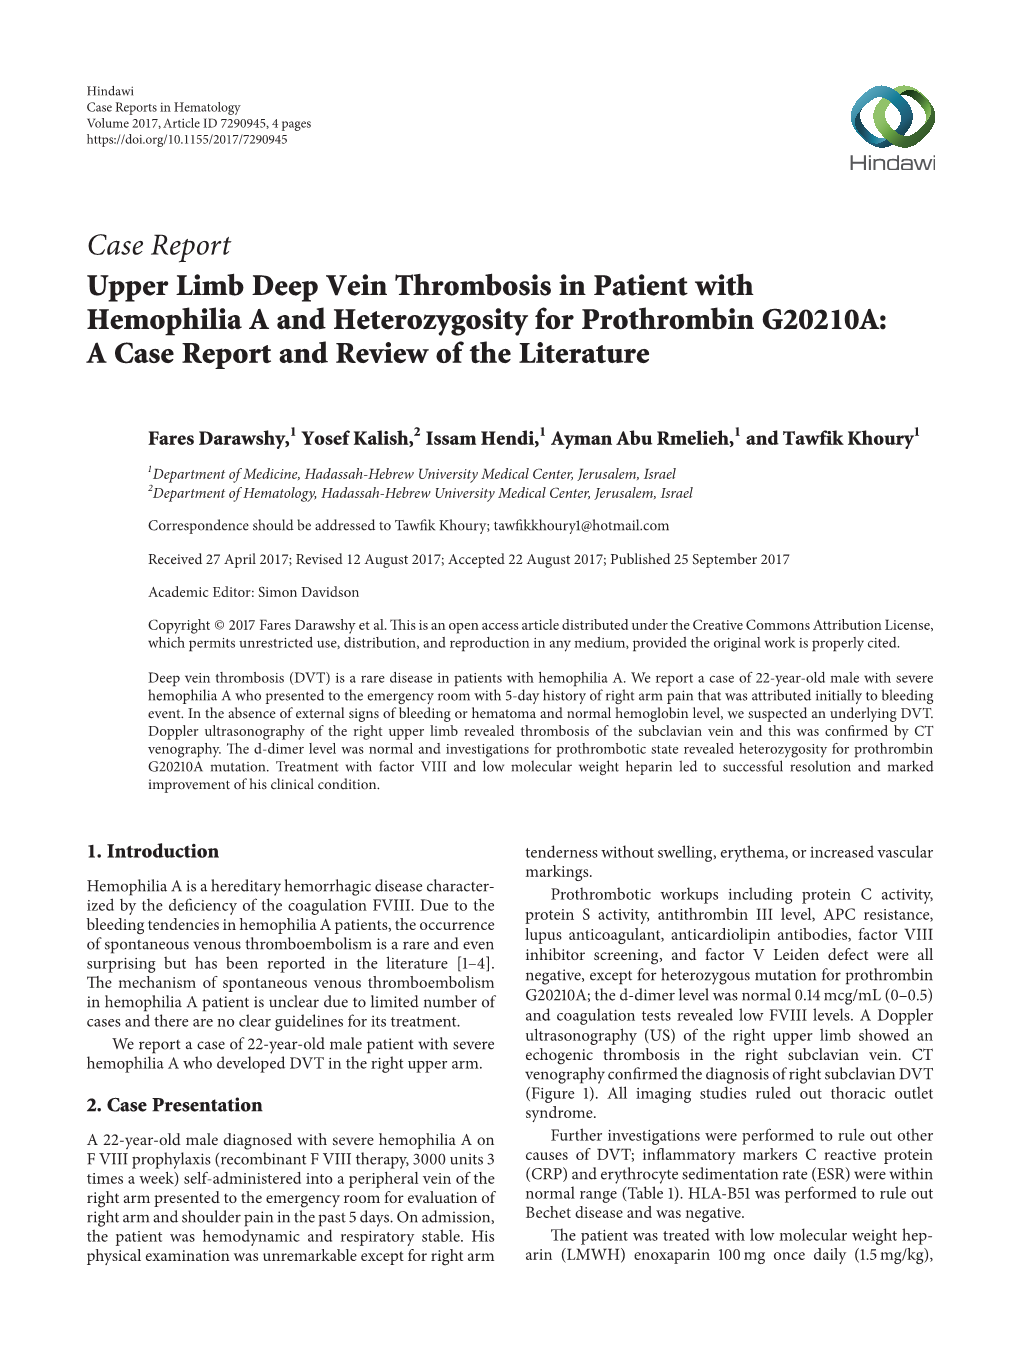 Upper Limb Deep Vein Thrombosis in Patient with Hemophilia a and Heterozygosity for Prothrombin G20210A: a Case Report and Review of the Literature